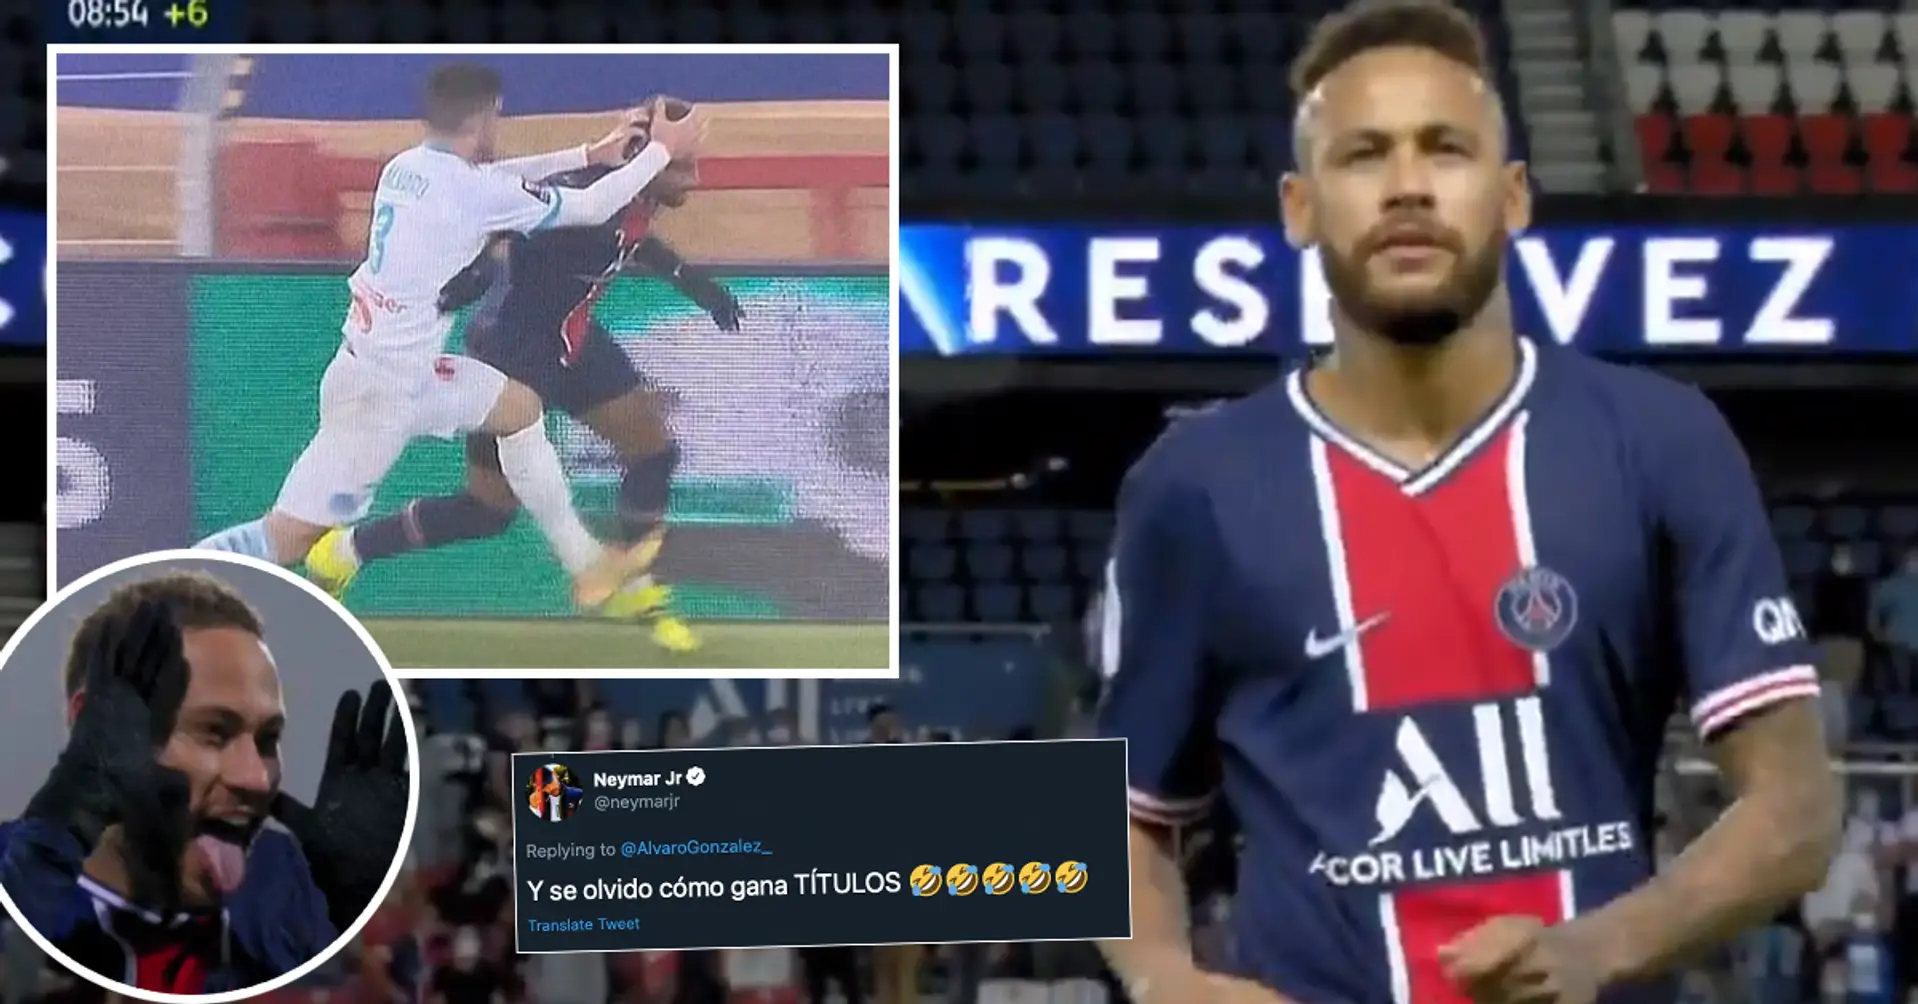 'My parents taught me how to take out garbage'. Marseille's Alvaro Gonzalez insults Neymar on Twitter